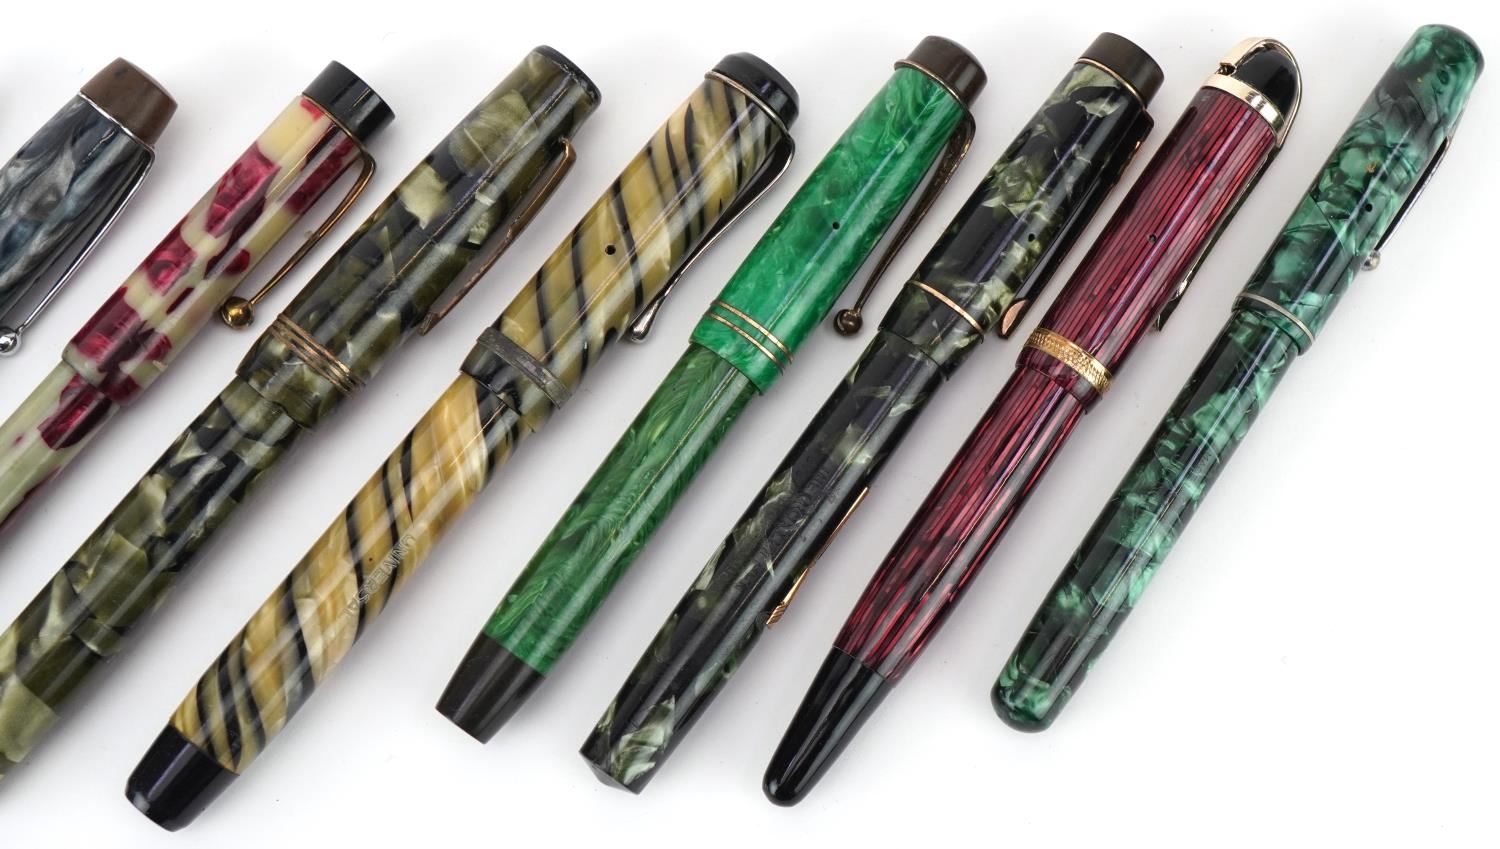 Vintage fountain pens, mainly marbleised, some striped, including Croxley and Watermans - Image 3 of 6